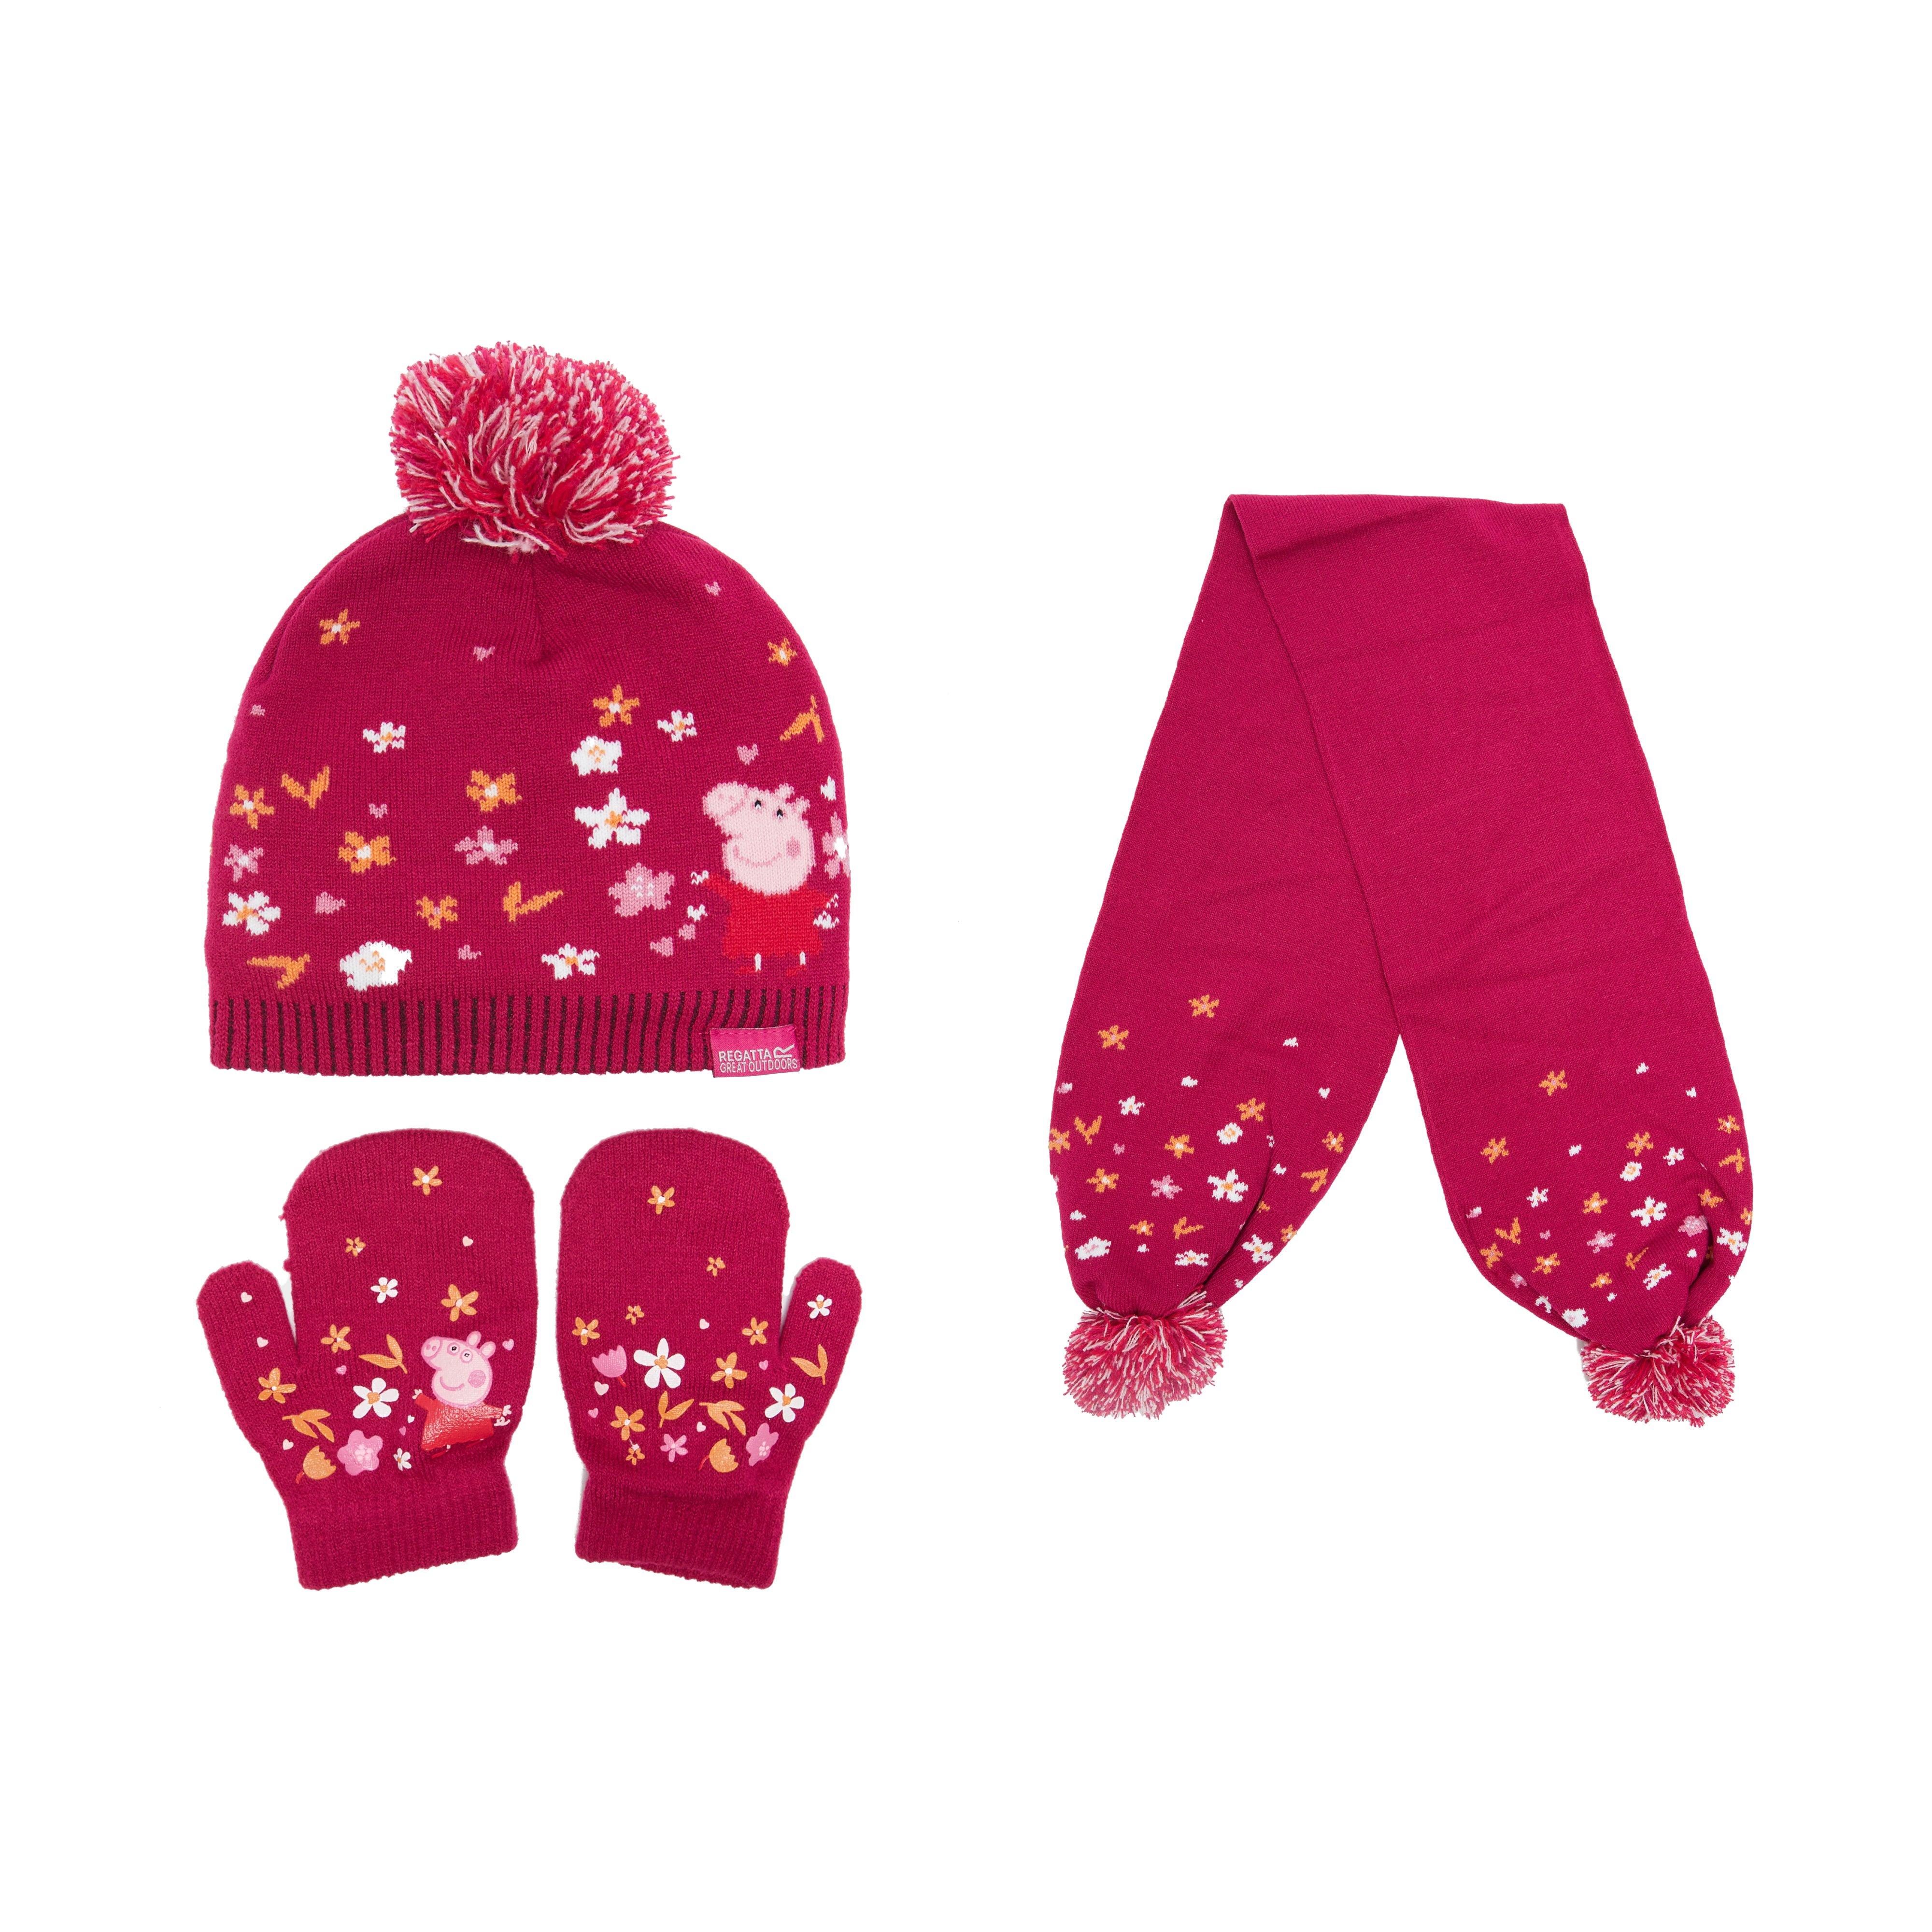 Peppa Pig Knitted Pom Pom Hat Scarf and Glove Set Pink